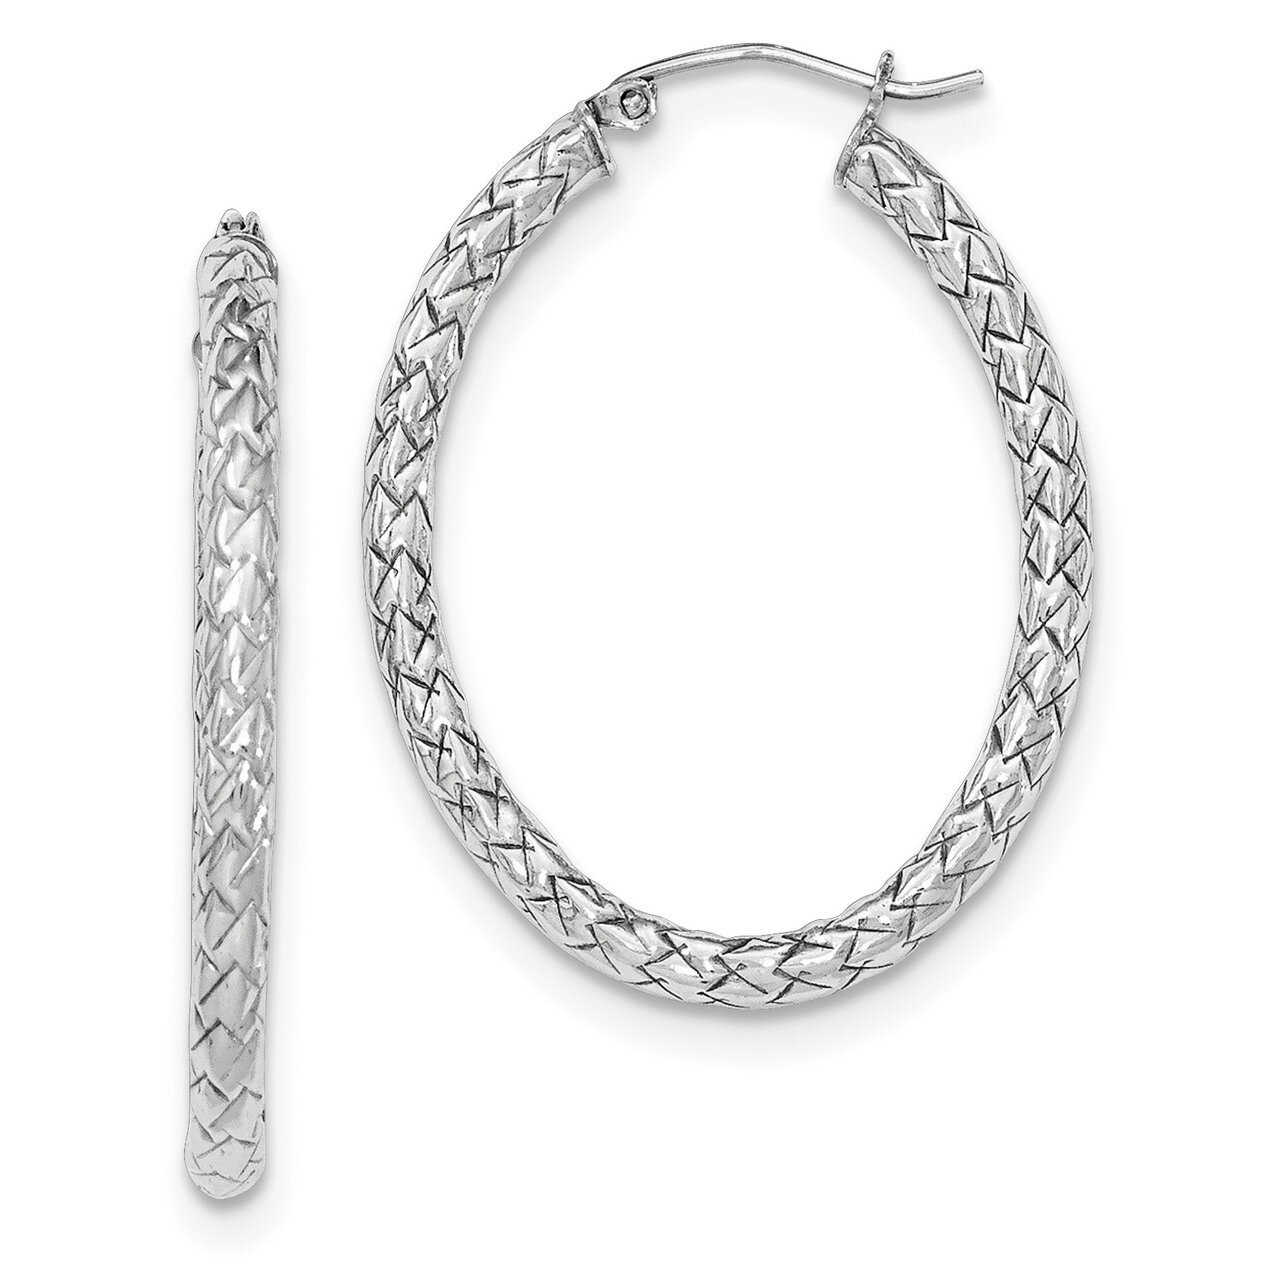 Textured Oval Hoop Earrings Sterling Silver Rhodium-plated Polished QE11583